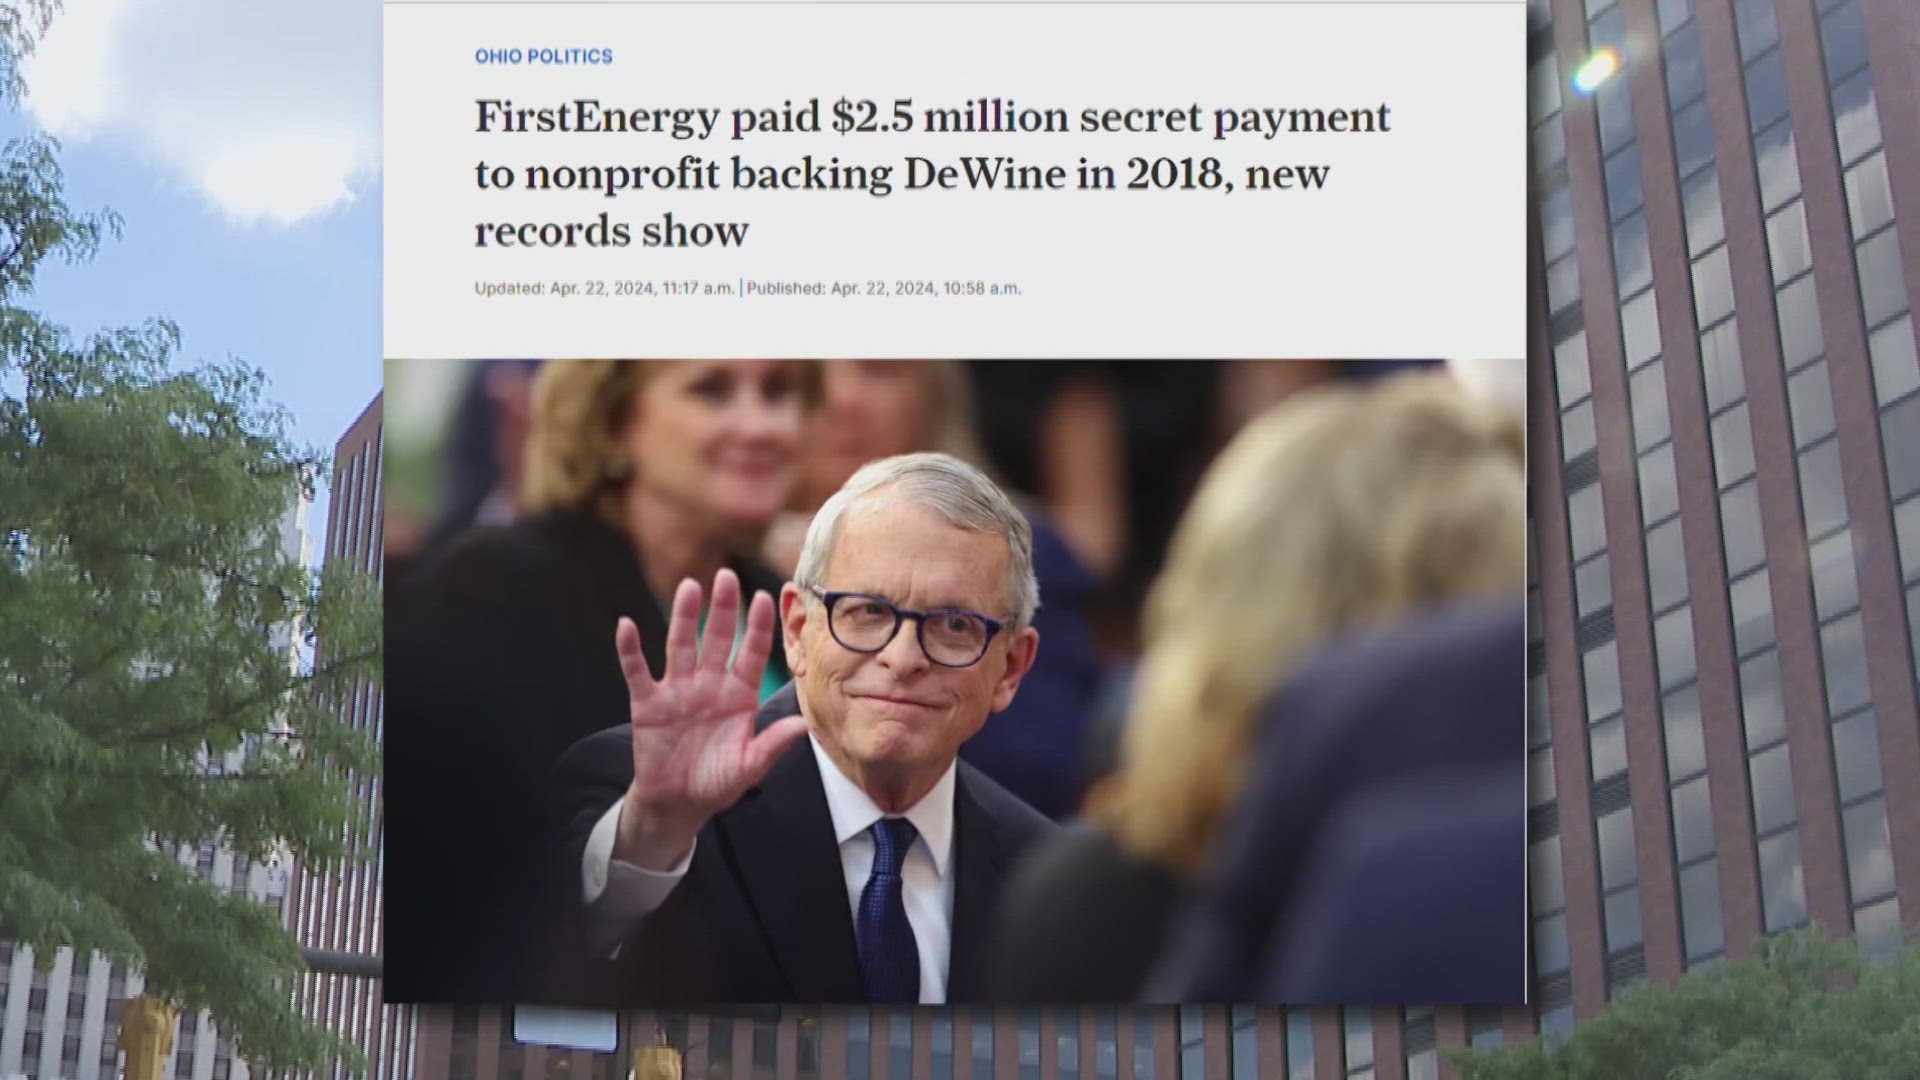 In partnership with 3News, Cleveland.com uncovered filings showing the company secretly paid millions to groups supporting Gov. Mike DeWine and Lt. Gov. Jon Husted.